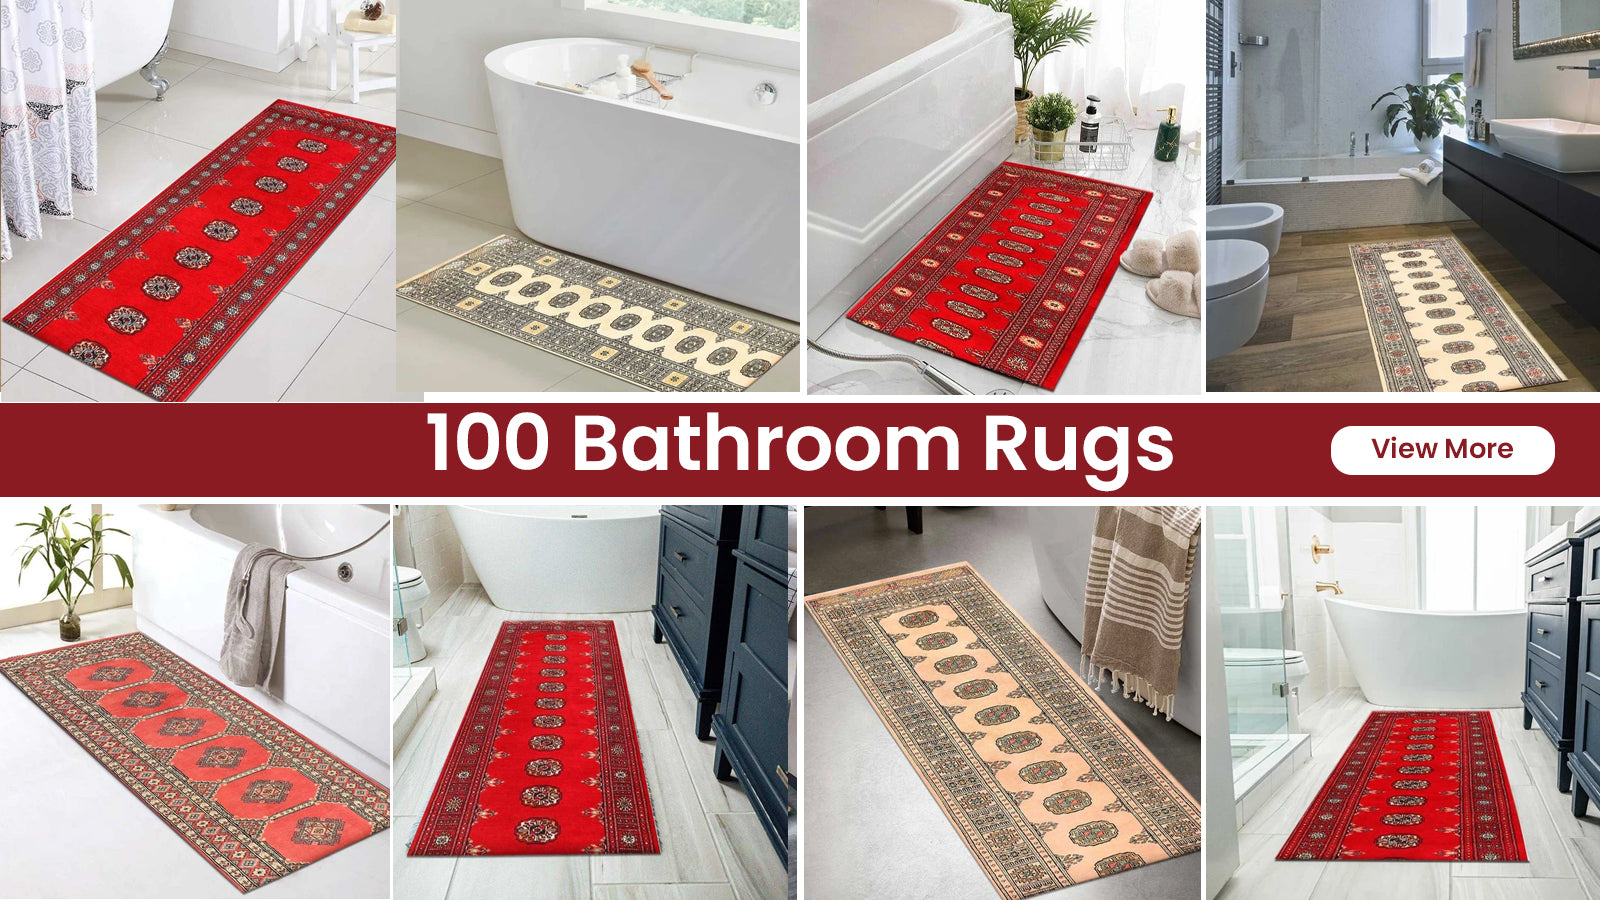 Retro Pattern Door Mat, Floor Mat, Bedroom Non-slip Memory Foam Bath Rug, Quick  Drying, Machine Washable, Soft And Comfortable Bathroom Accessories,  Durable And Well Washed, Can Put Bathroom, Entry Door, And Other